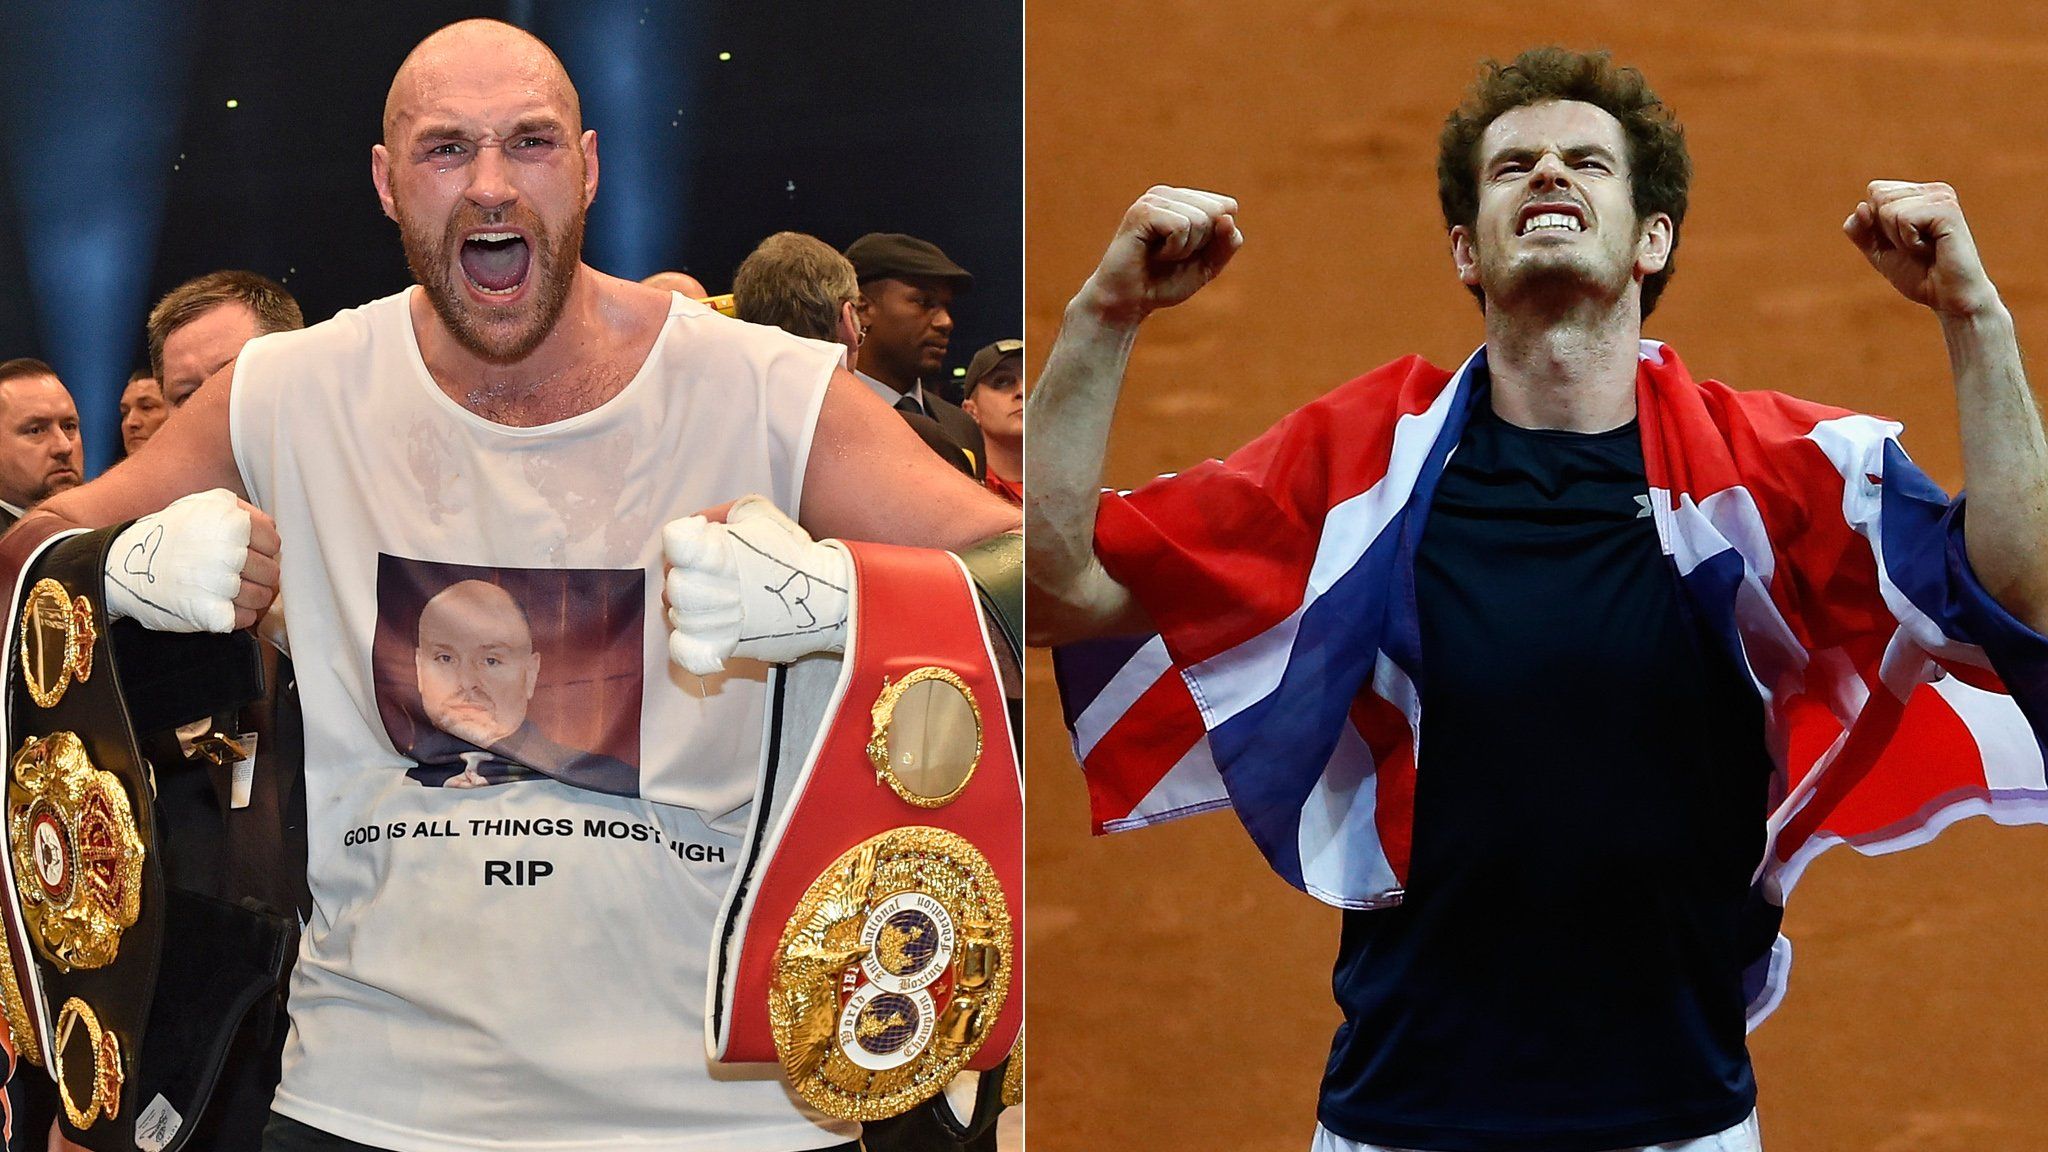 Composite image showing Tyson Fury and Andy Murray